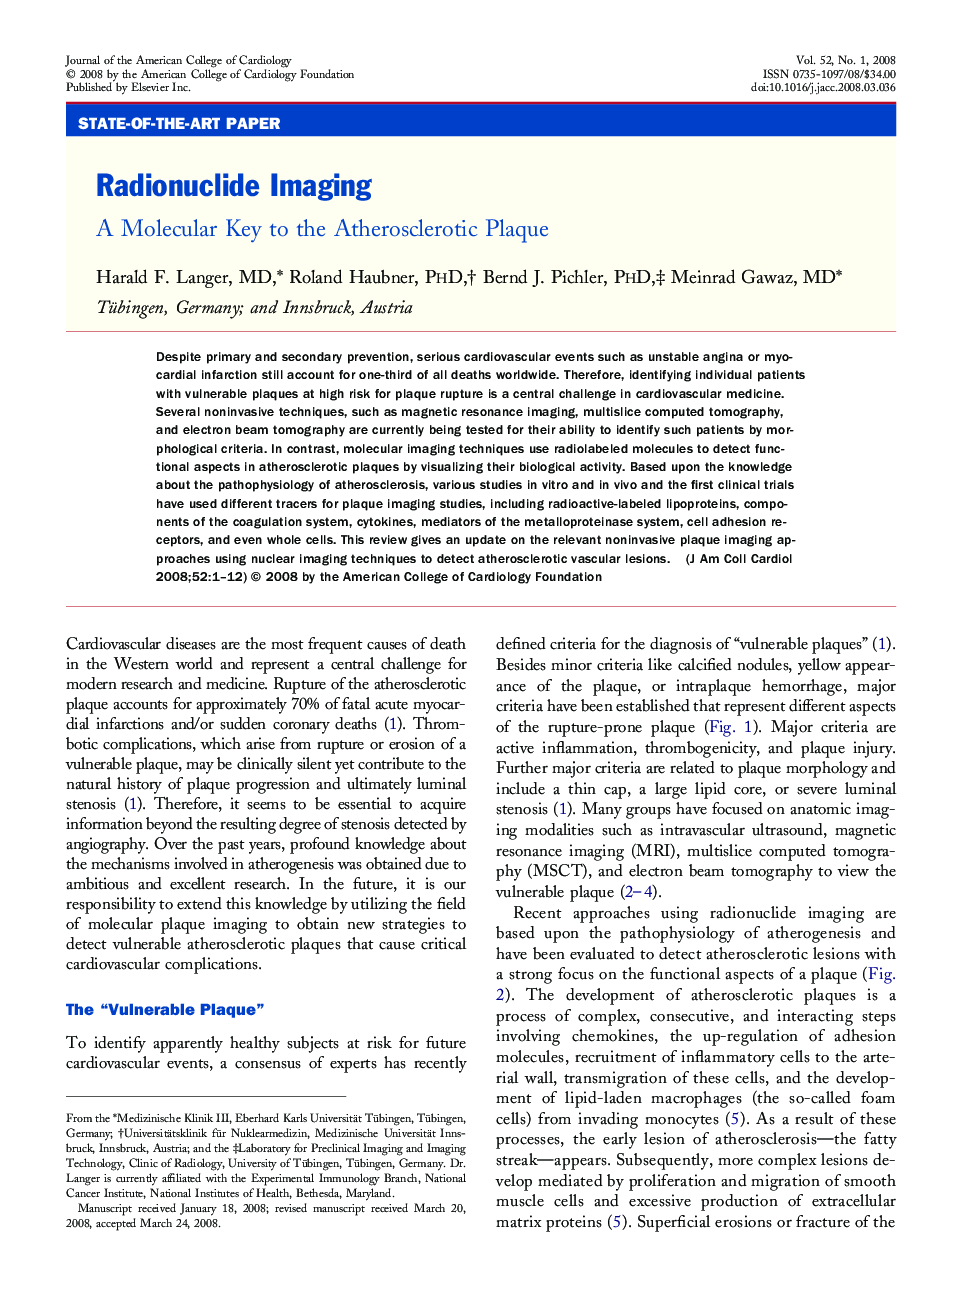 Radionuclide Imaging : A Molecular Key to the Atherosclerotic Plaque